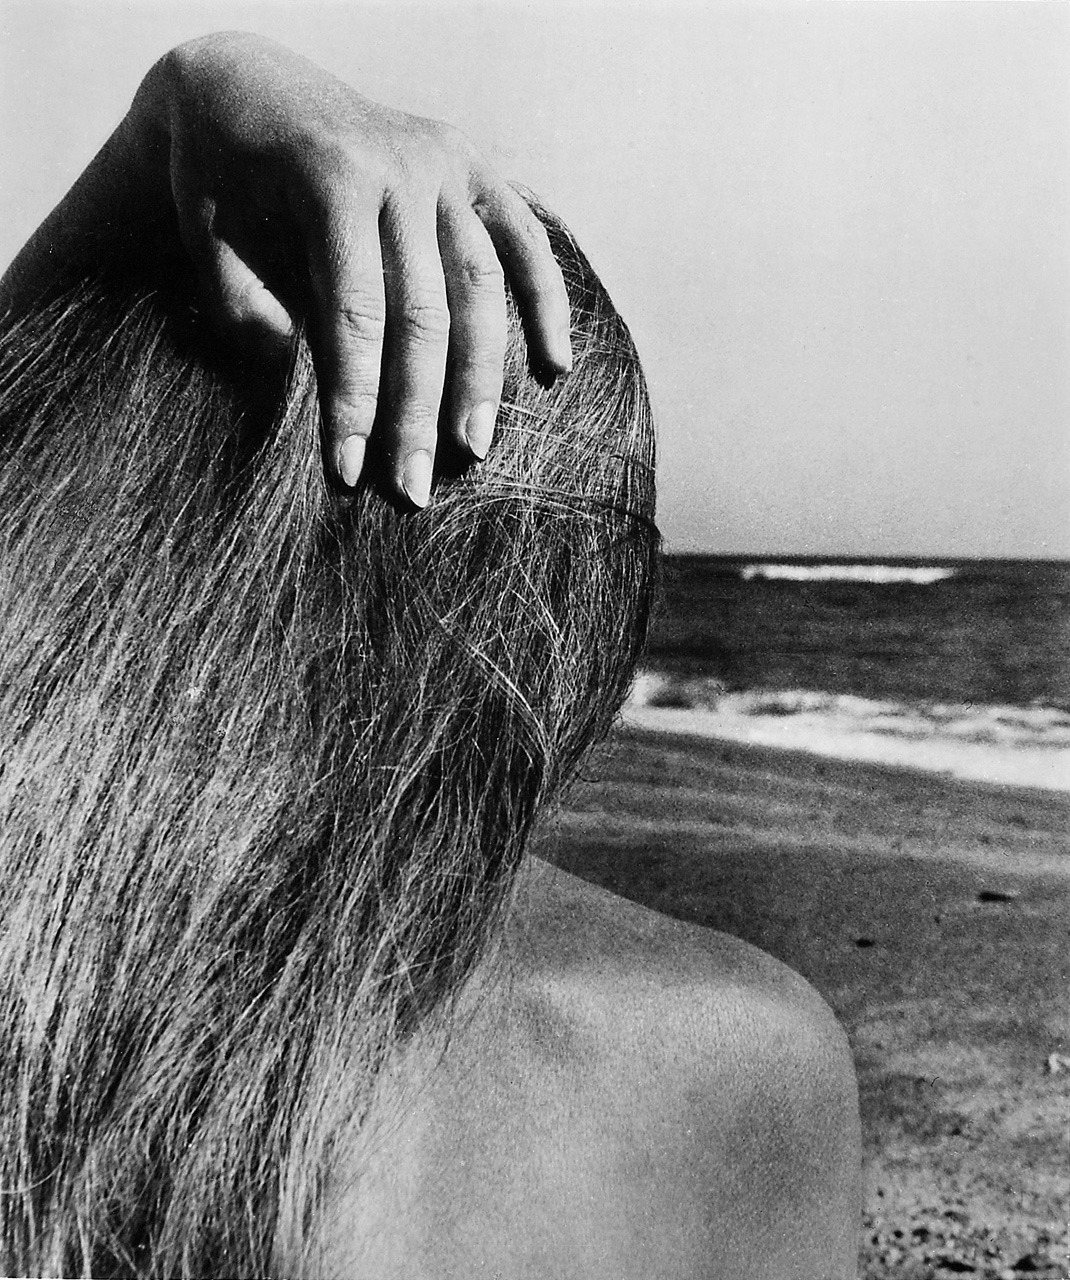 Taxo d'Aval photo by Bill Brandt, France, 1957